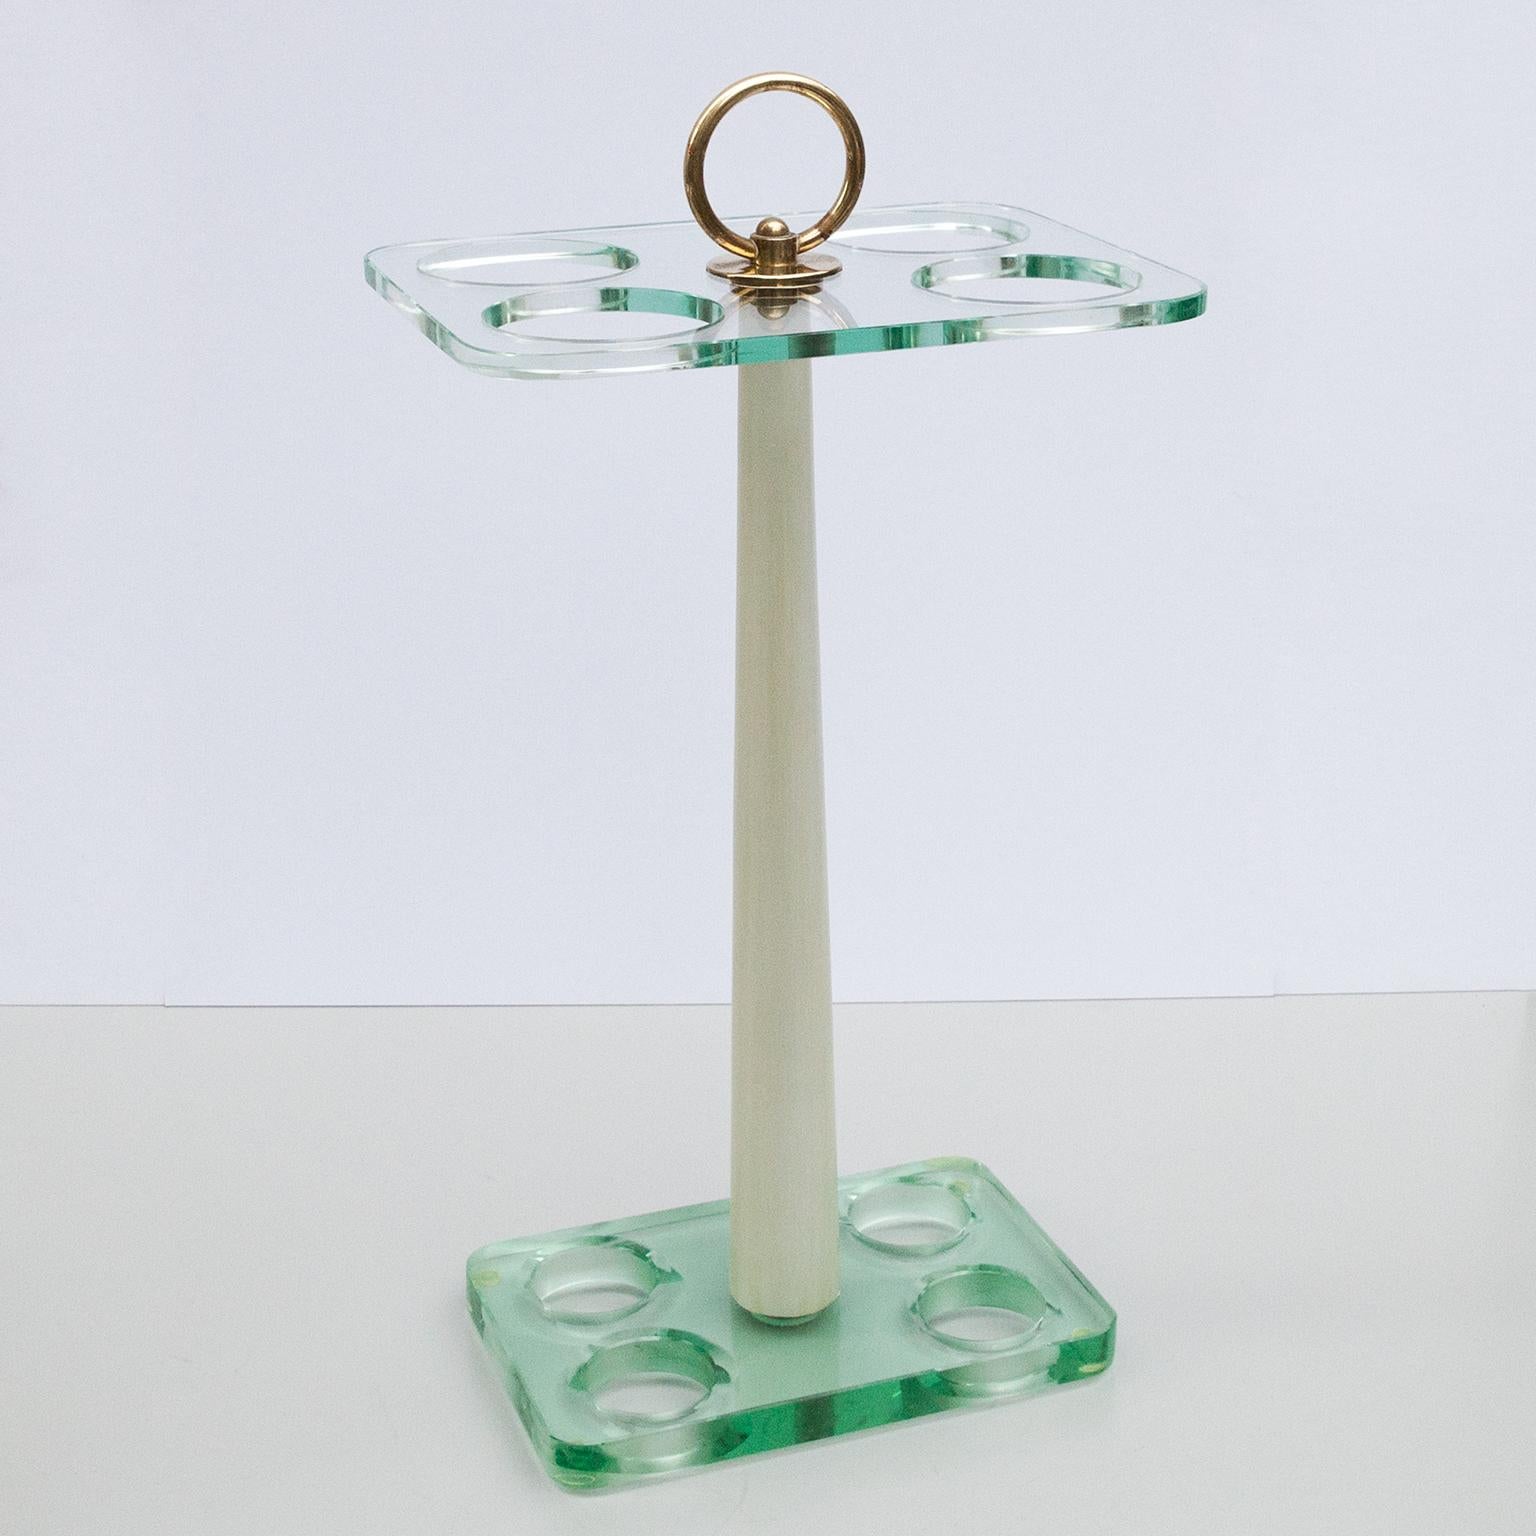 Fontana Arte umbrella stand, Italy, 1950s. Clear, slightly greenish glass, light white creamed painted wood, round brass handle and four brass inlays.